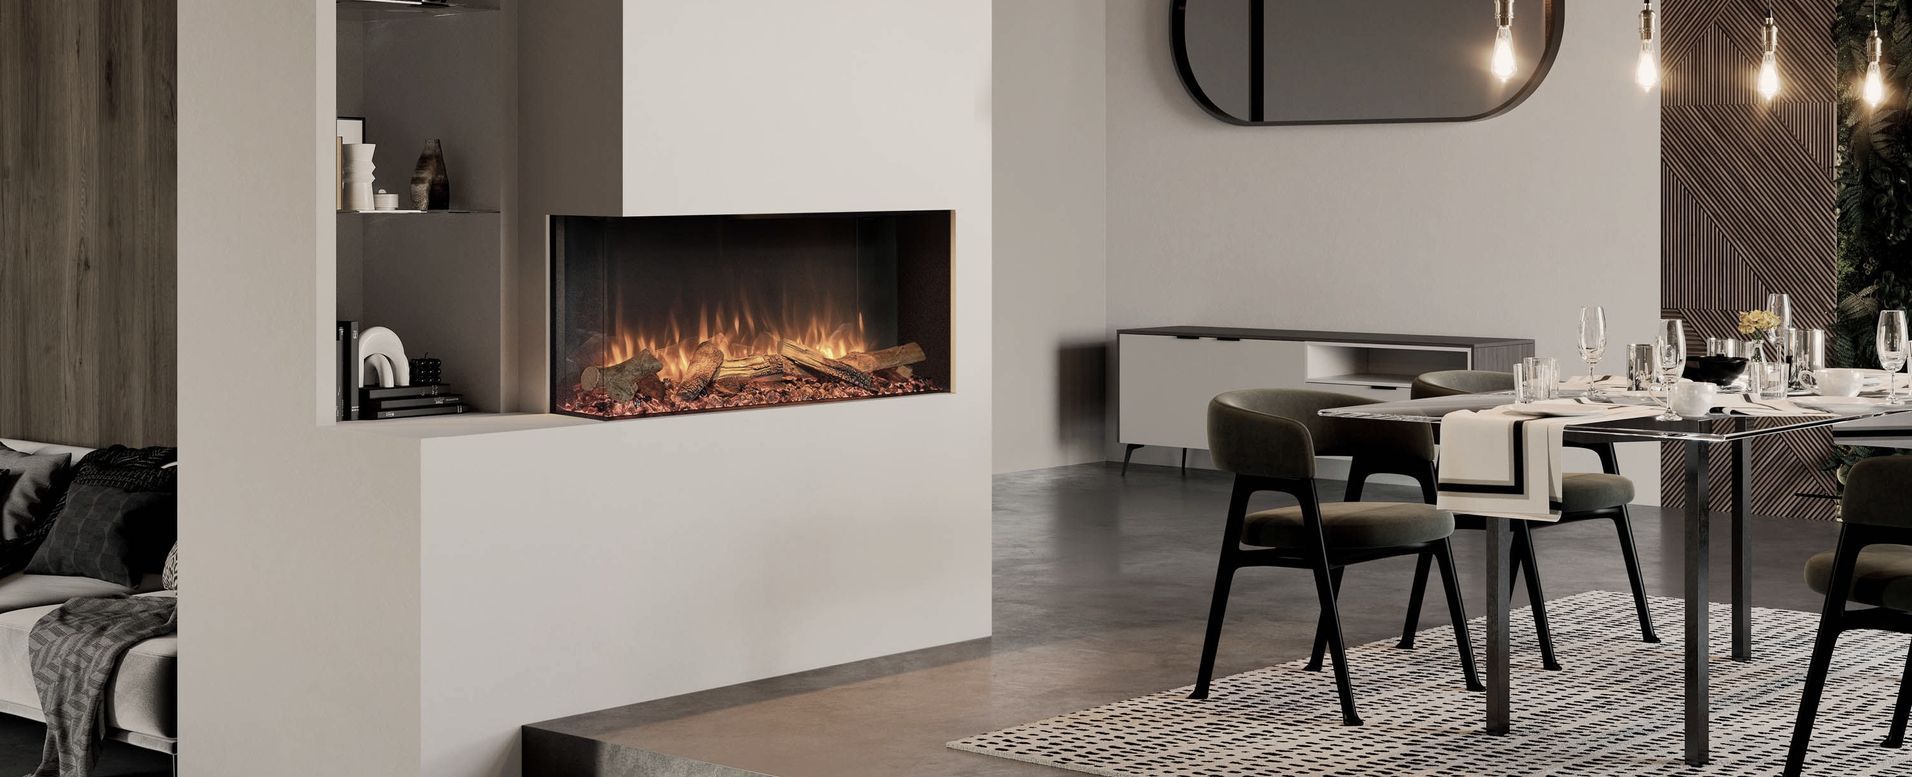 The Fireplace Ltd Banner image